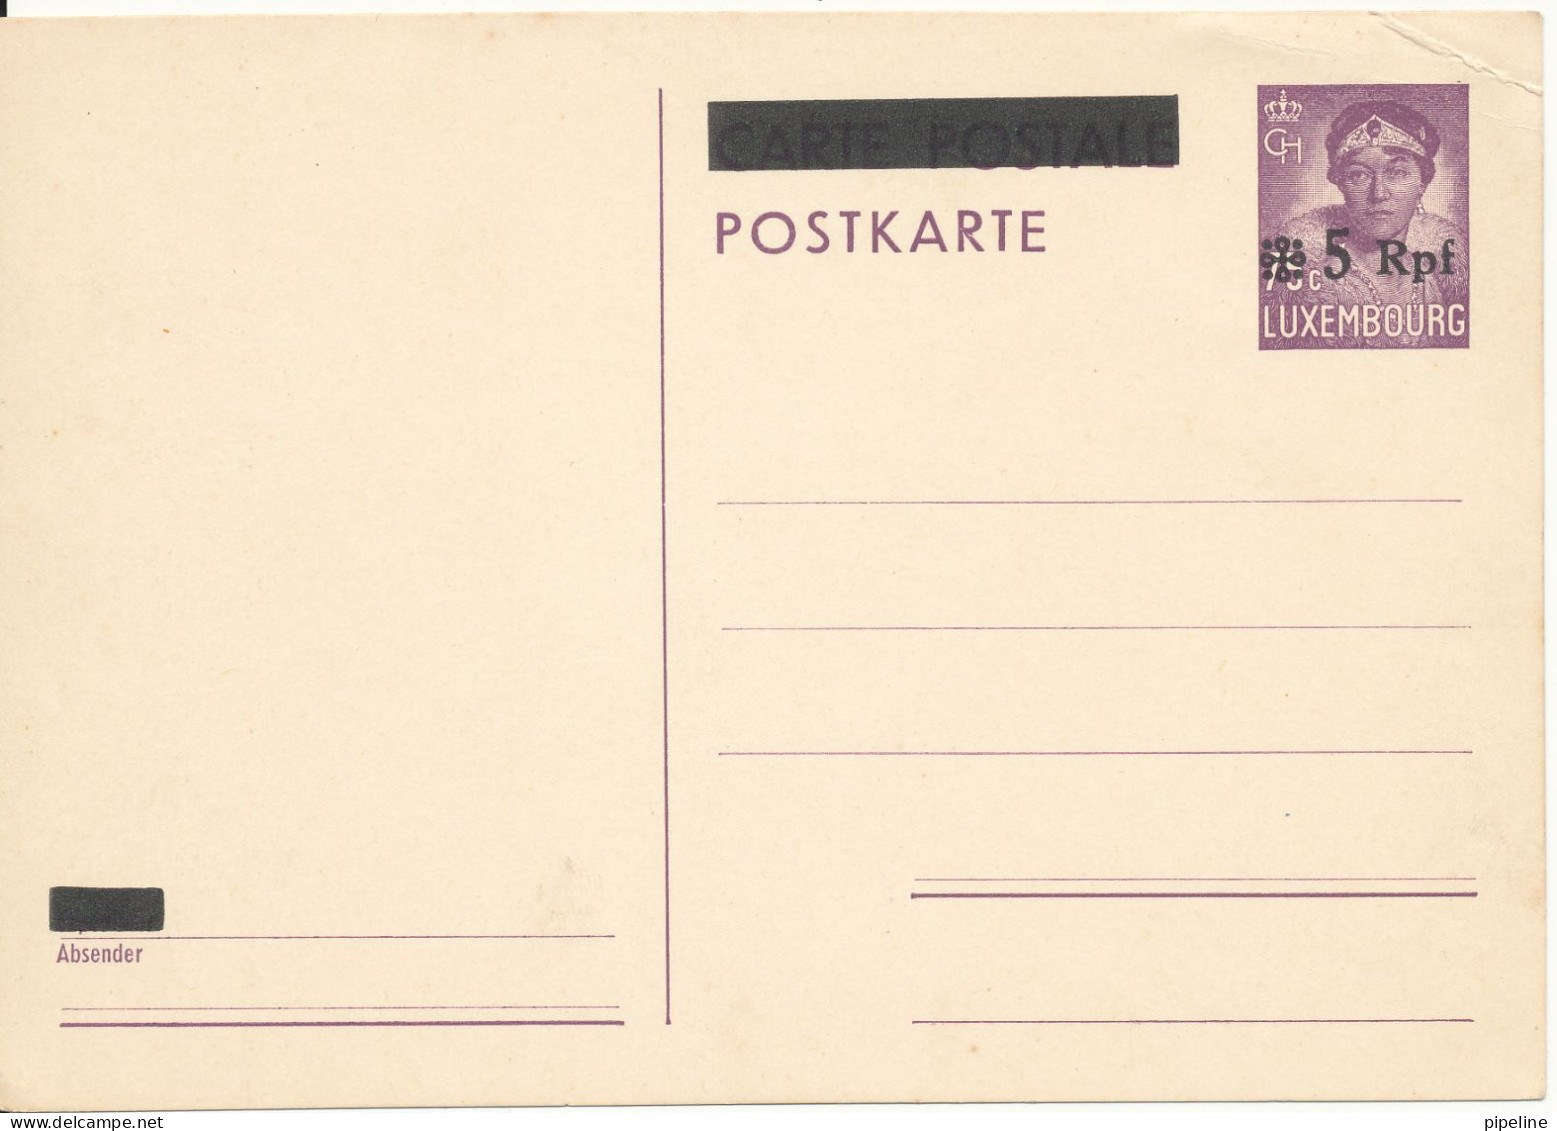 Luxembourg Postal Stationery Postcard Overprinted In Mint Condition (a Weak Corner Of The Card) - Interi Postali